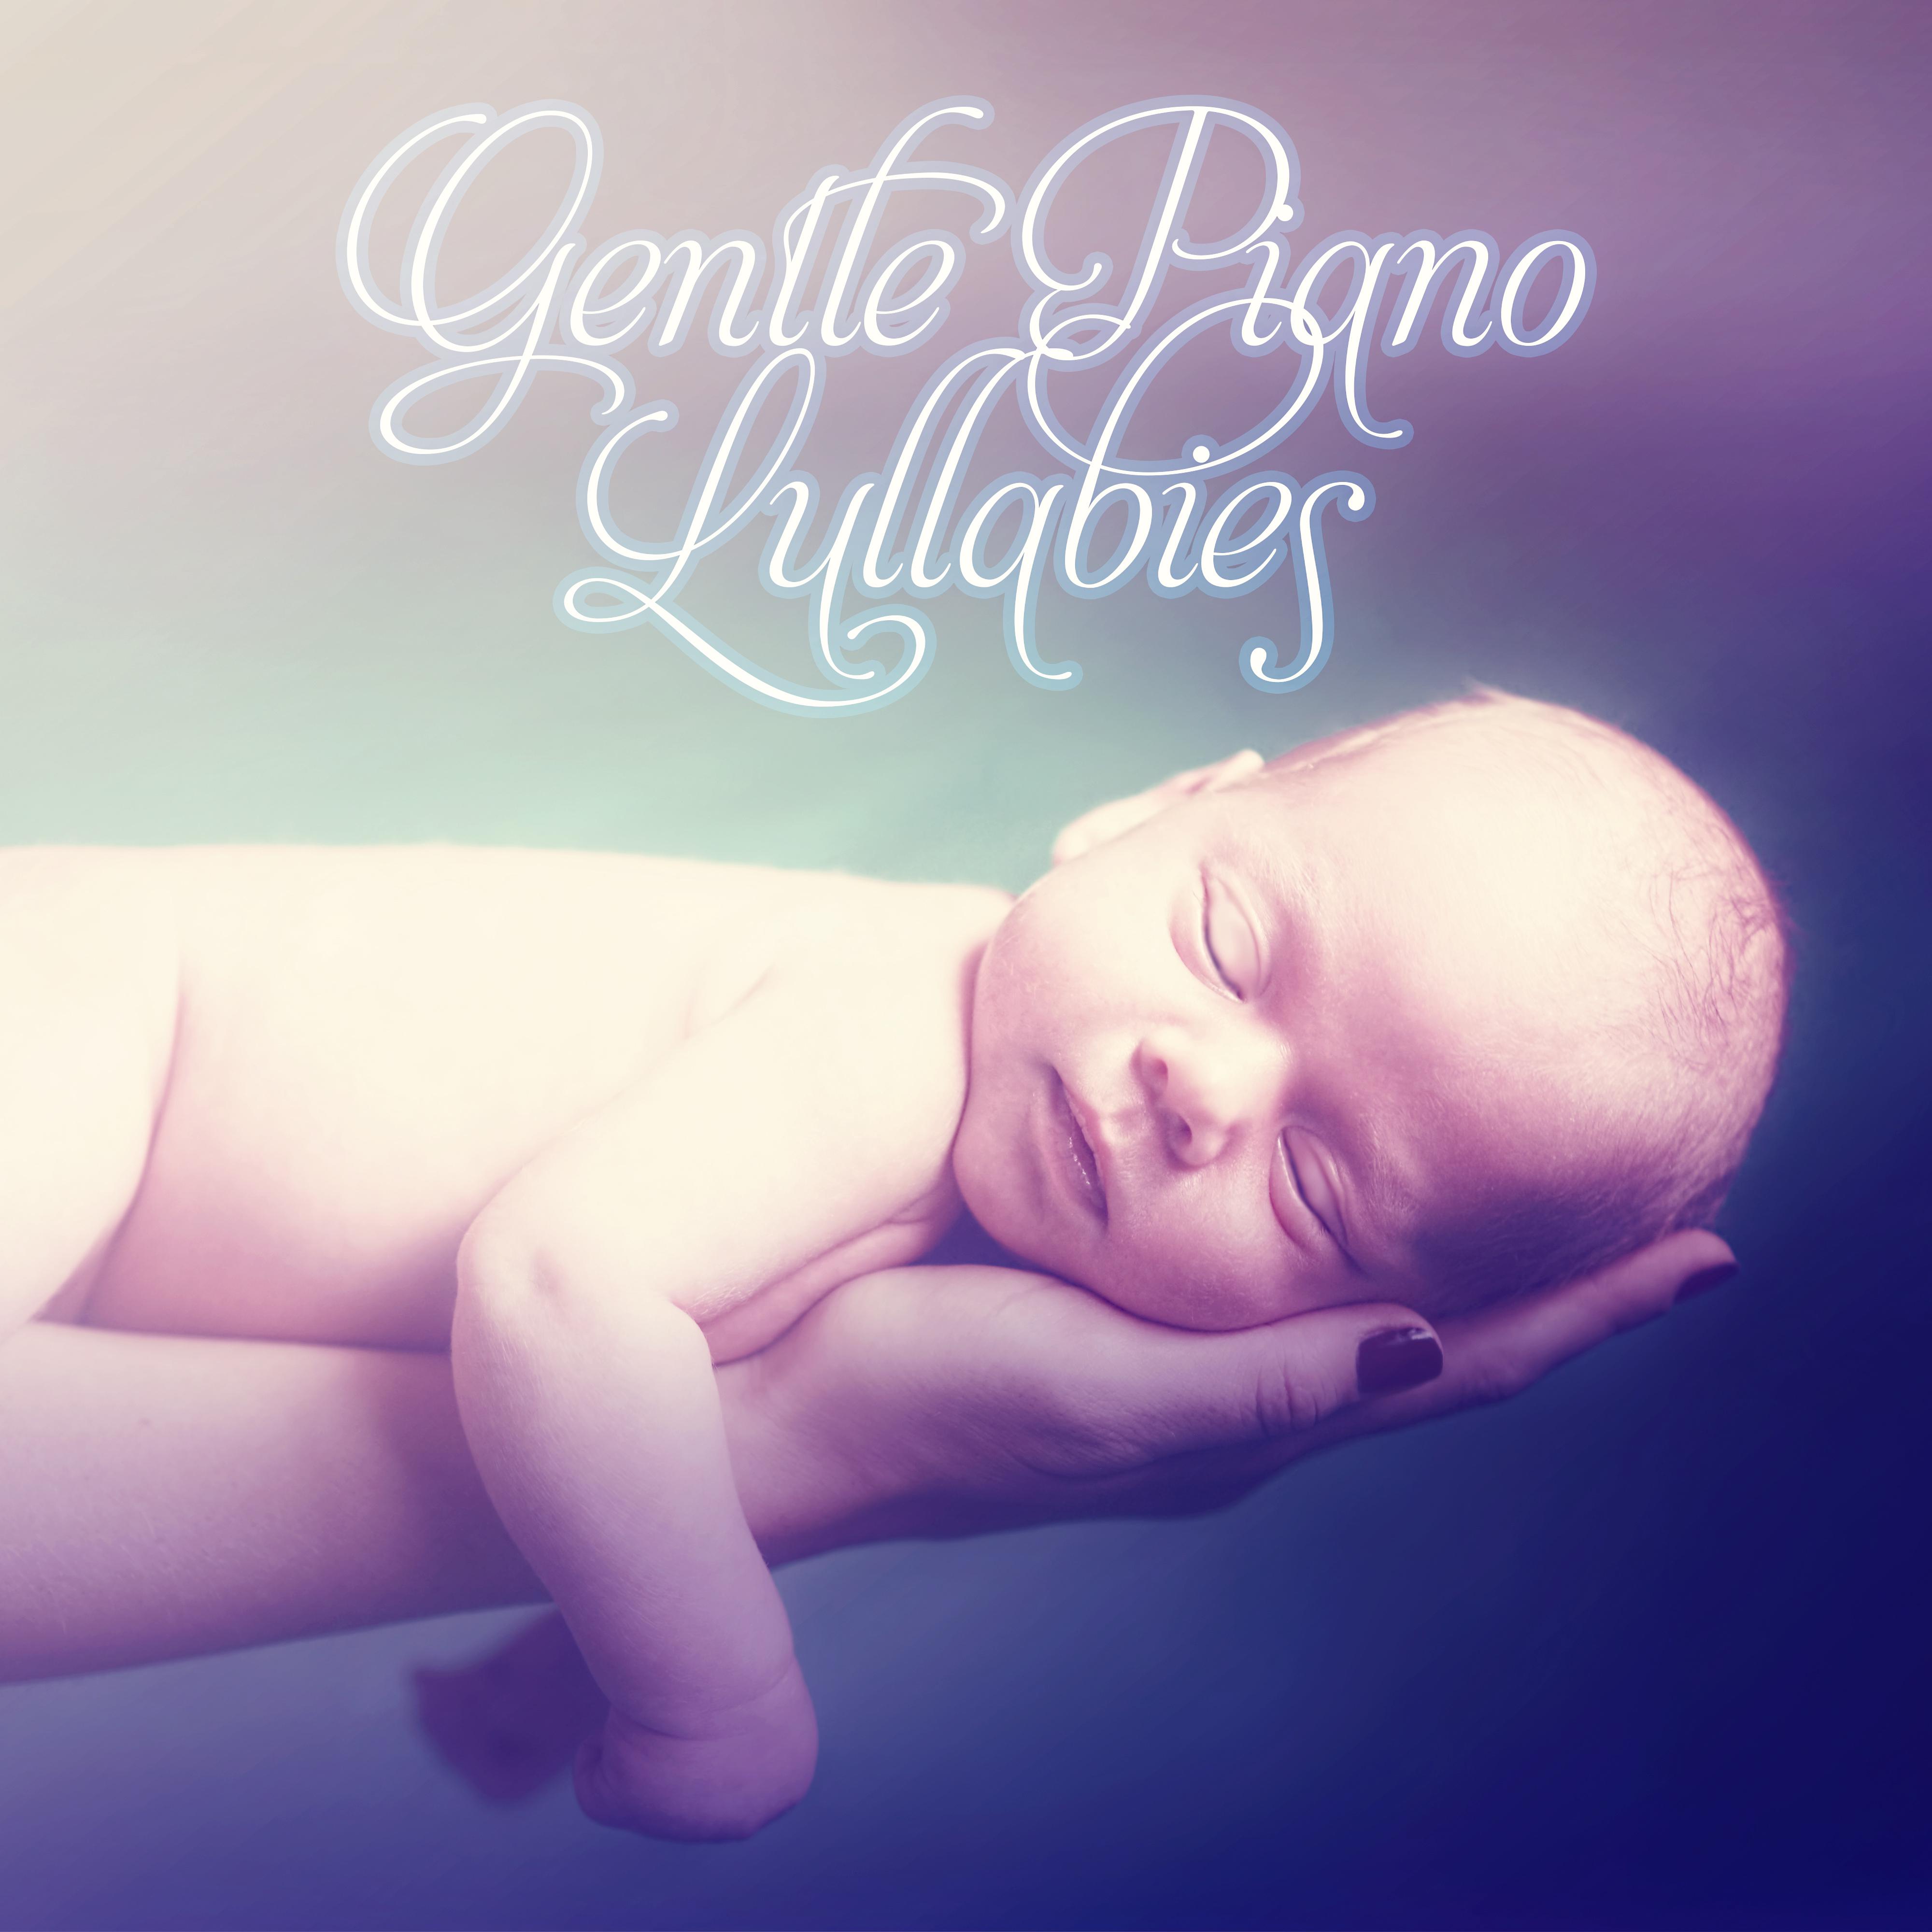 Gentle Piano Lullabies – Baby Sleep Aid, Help Your Baby Sleep, Soft Music to Relax for Newborn, Songs for Toddlers, Relaxing and Southing Sounds for Babies